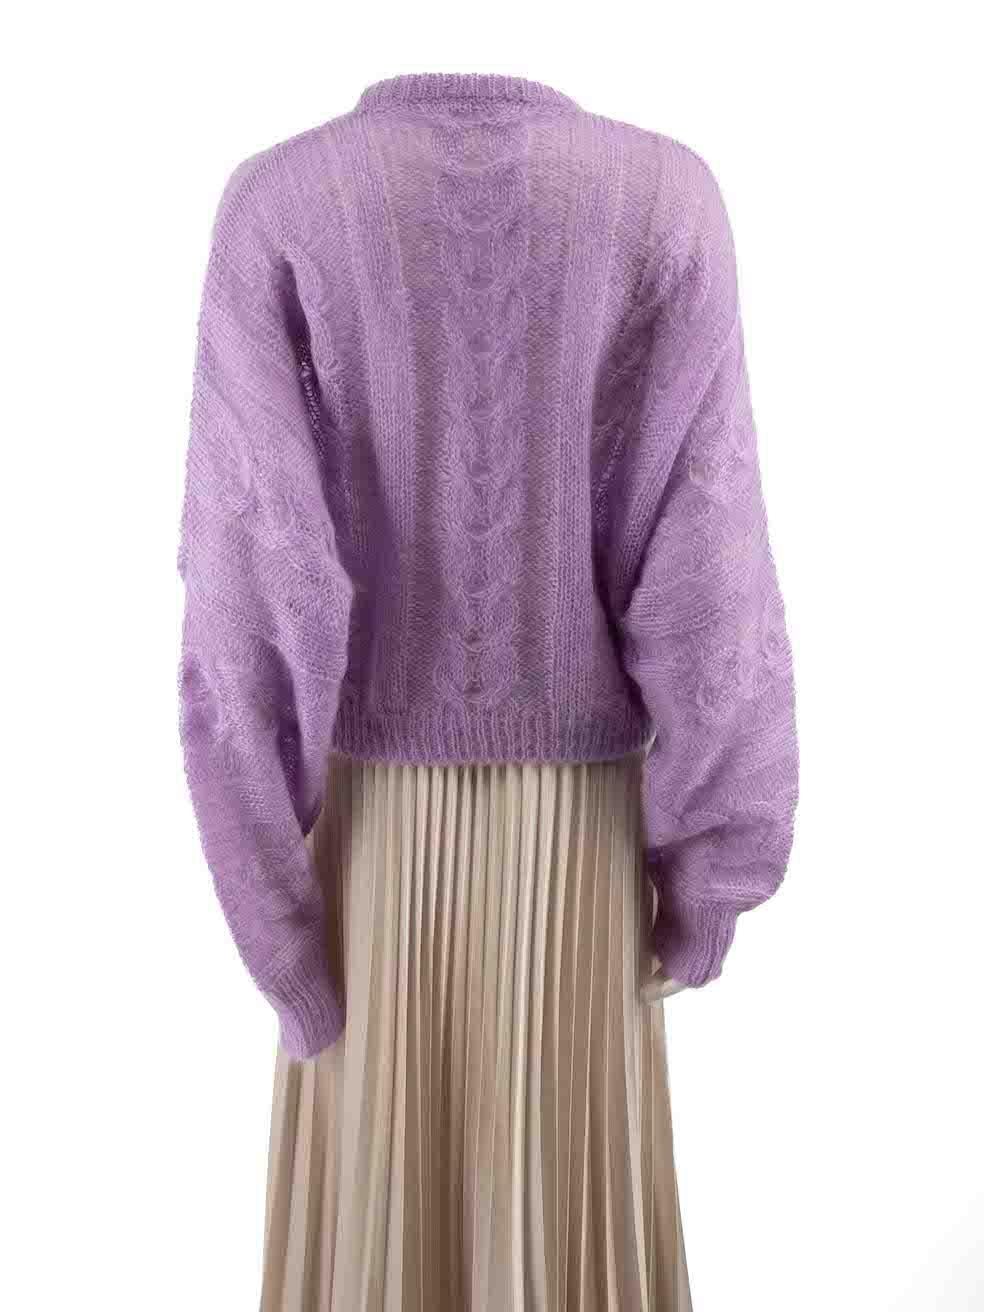 Miu Miu Lilac Mohair Knitted Jumper Size XXS In Good Condition For Sale In London, GB